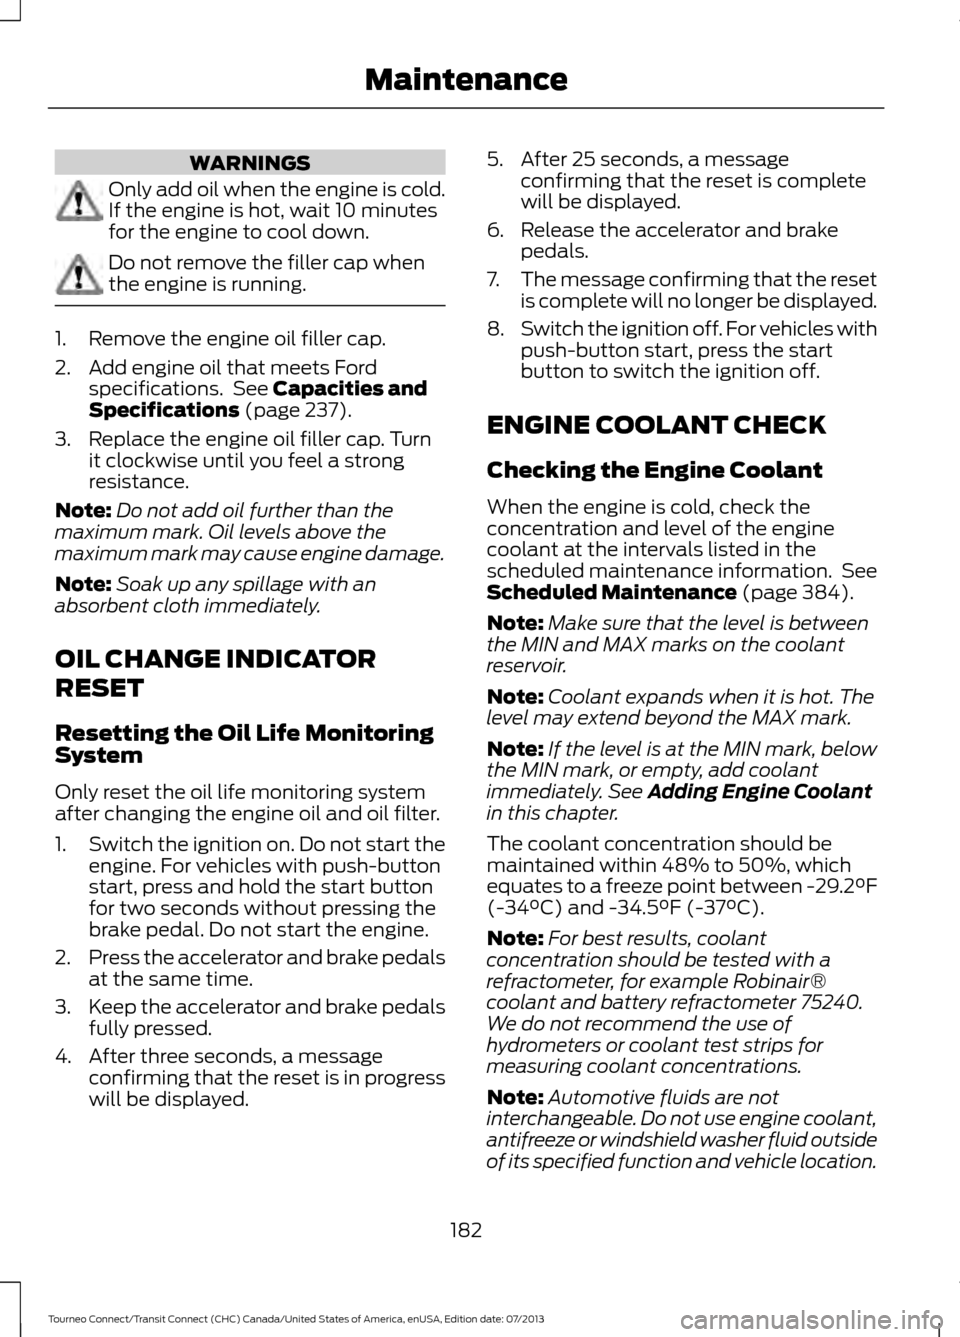 FORD TRANSIT CONNECT 2014 2.G Owners Manual WARNINGS
Only add oil when the engine is cold.
If the engine is hot, wait 10 minutes
for the engine to cool down.
Do not remove the filler cap when
the engine is running.
1. Remove the engine oil fill